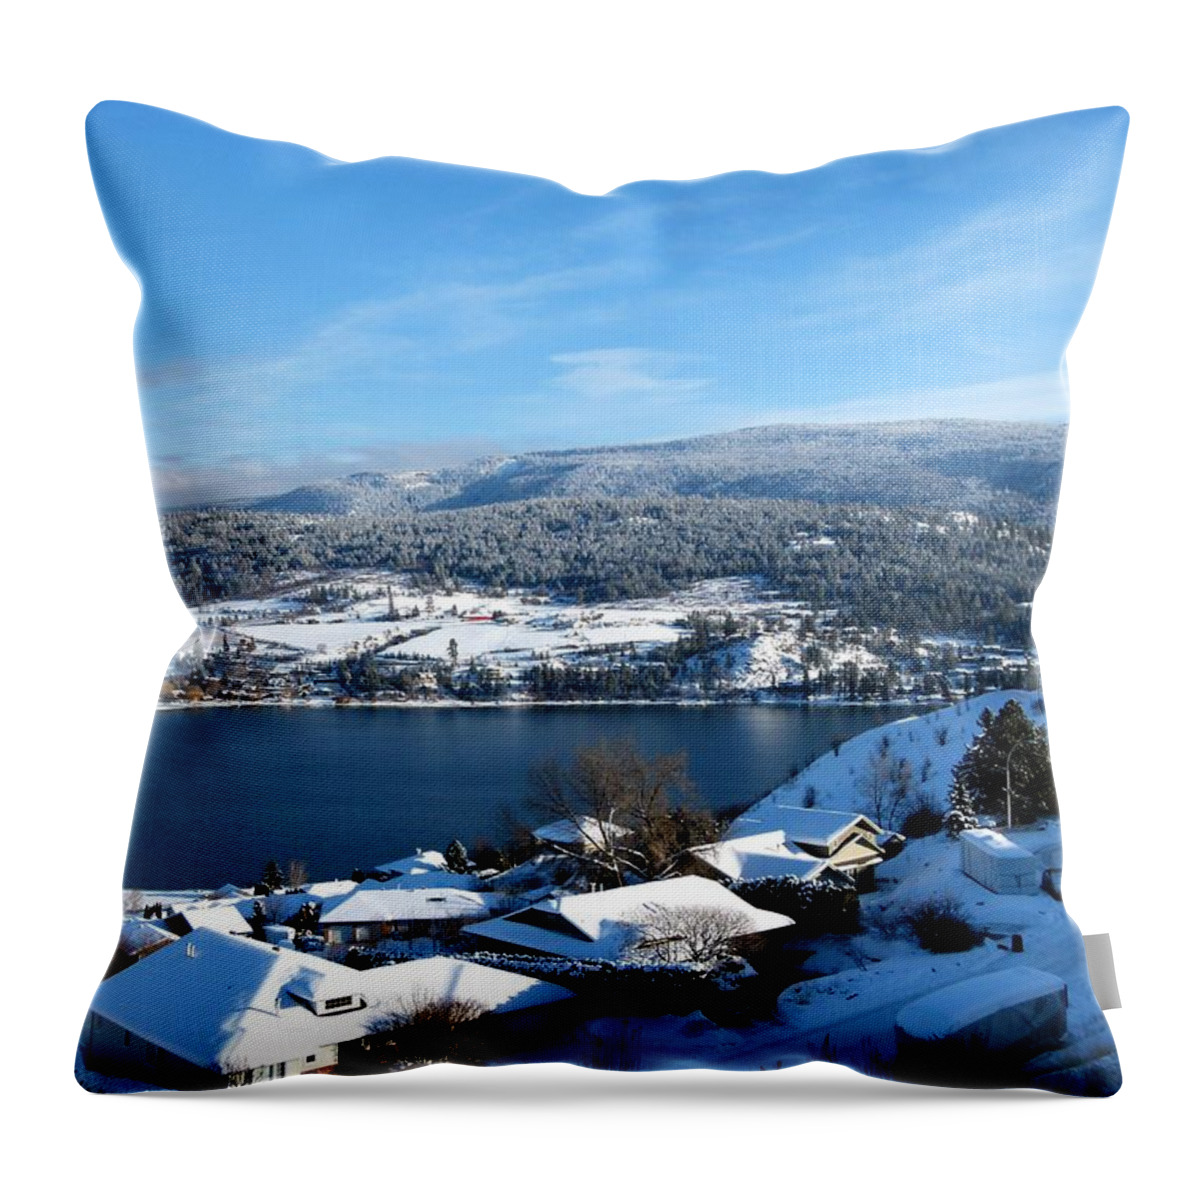 #redbarninthedistance Throw Pillow featuring the photograph Red Barn In The Distance by Will Borden